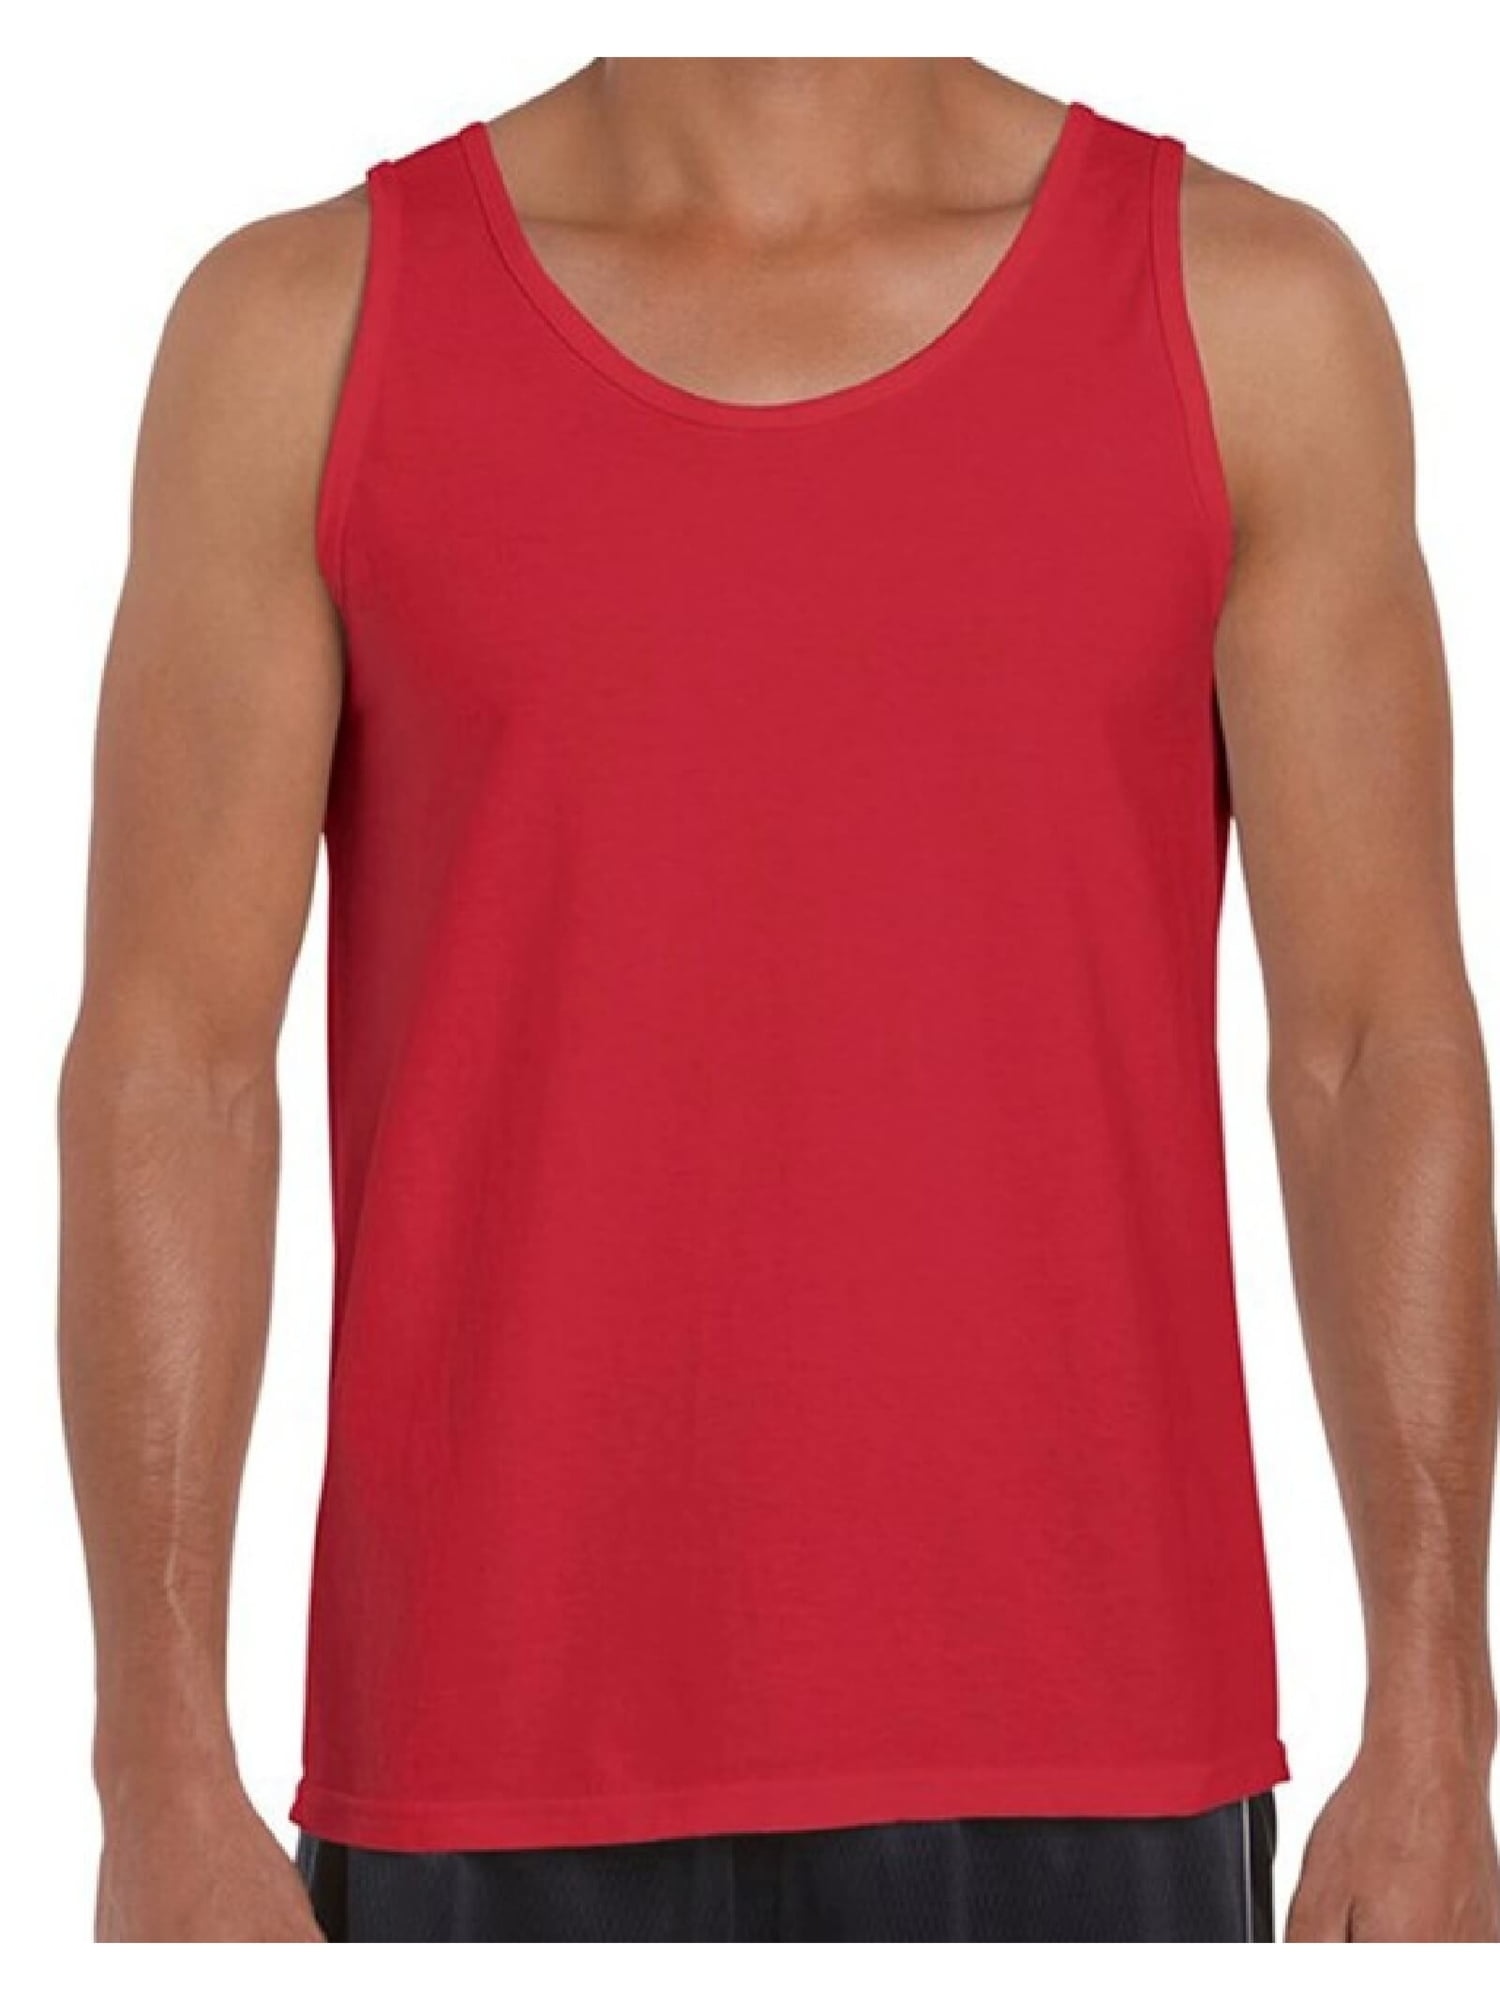 Remission acceleration naturlig Gildan Men's Tank Top Mens Muscle Shirts Best Mens Tanks Cotton Sleeveless  Shirts for Him Blank All Color Red Tees for Men Red Tanks Red Tank Top for  Men - Walmart.com